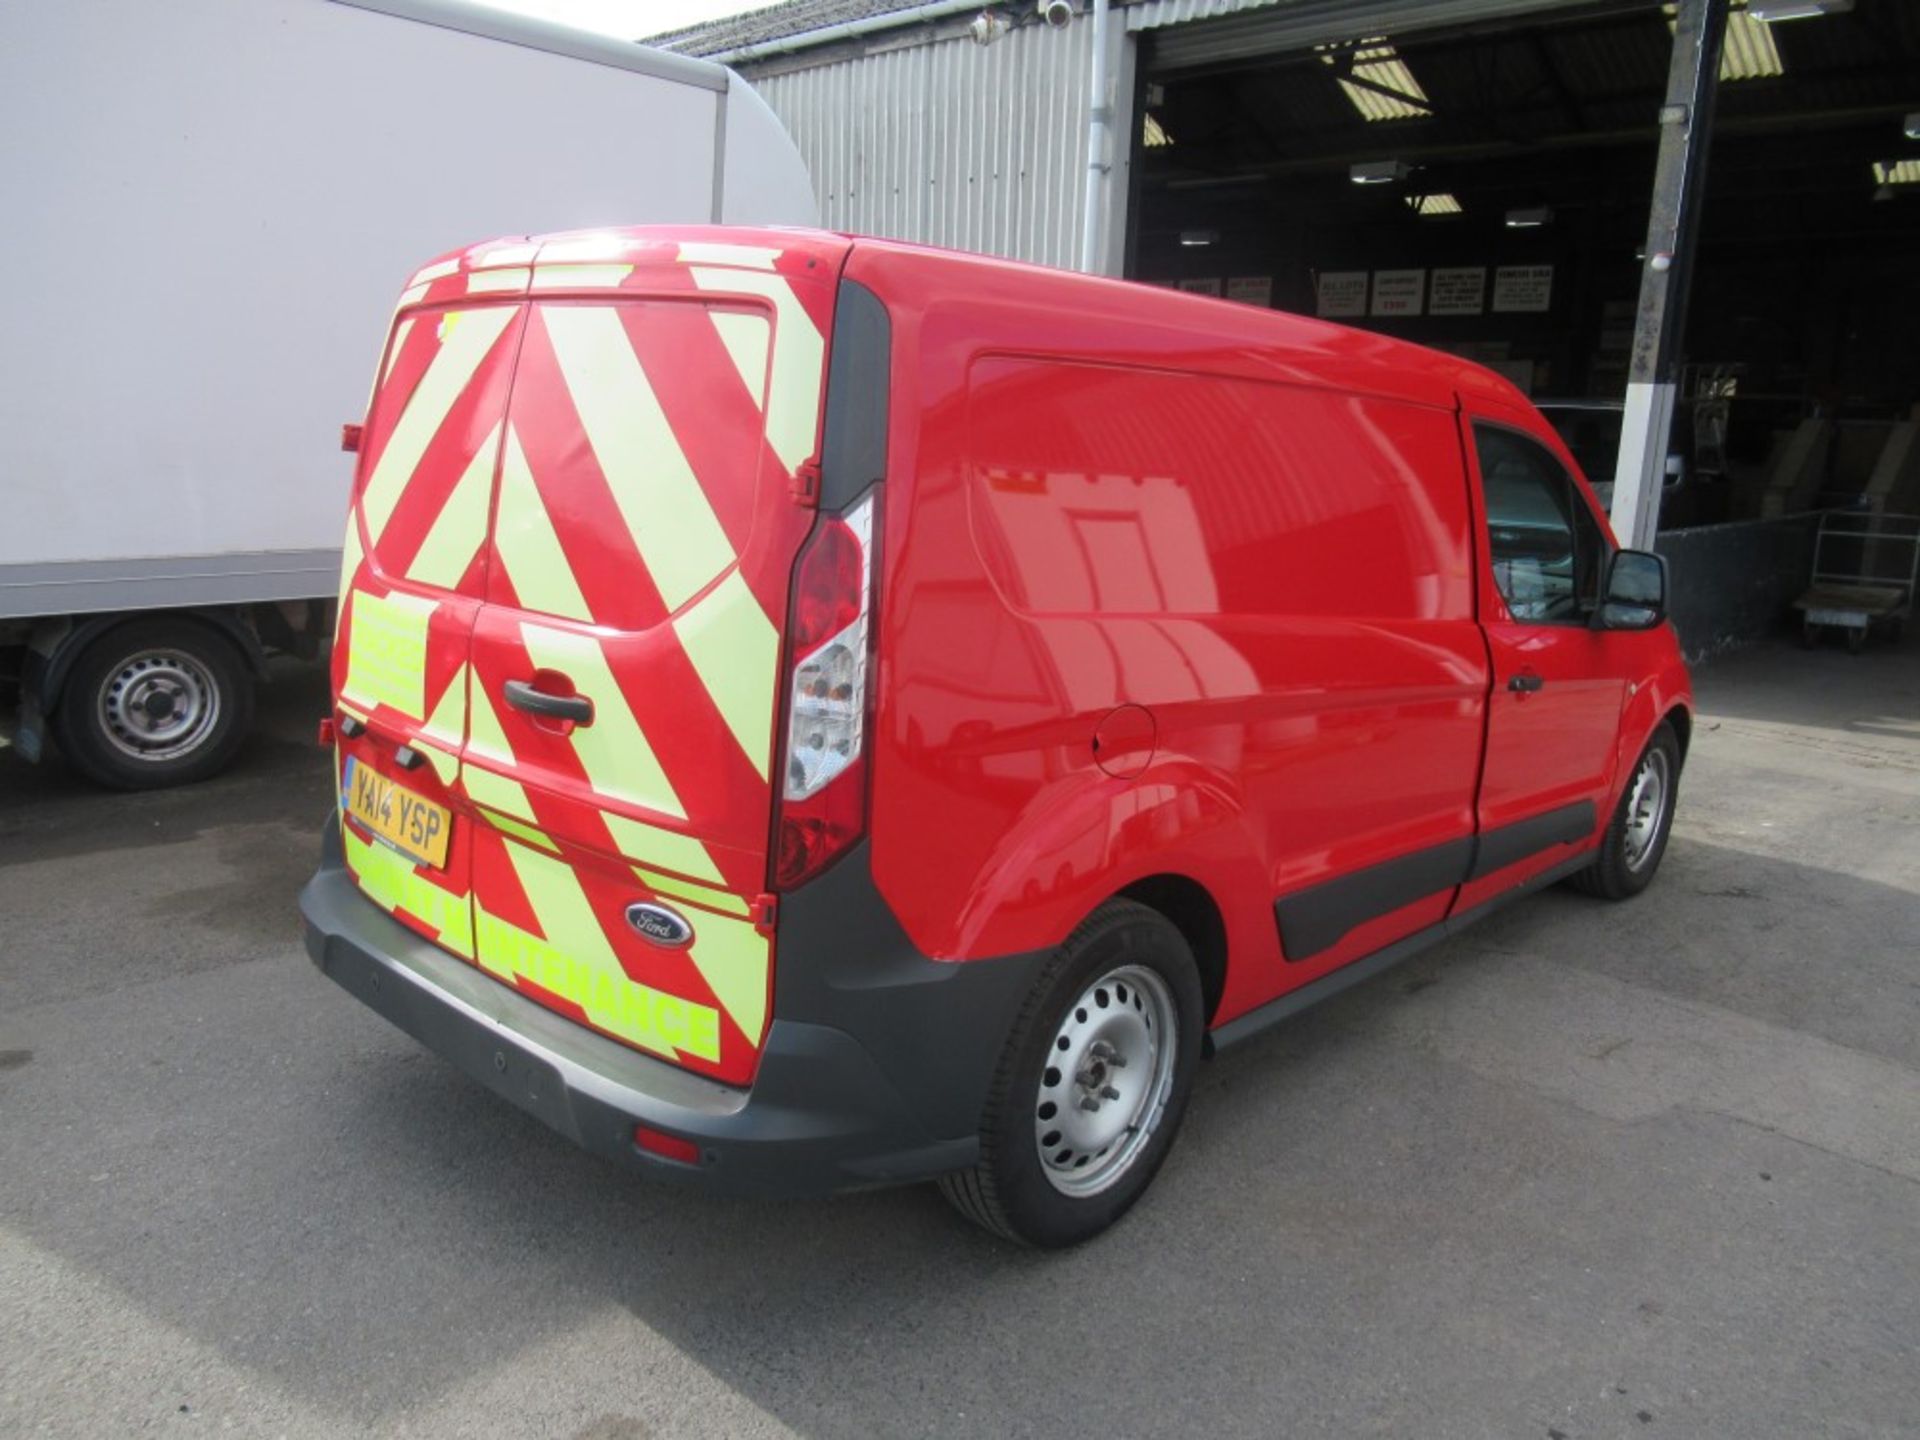 14 reg FORD TRANSIT CONNECT 210 ECONETIC, 1ST REG 07/14, 100222M WARRANTED, V5 HERE, 1 OWNER FROM - Image 4 of 7